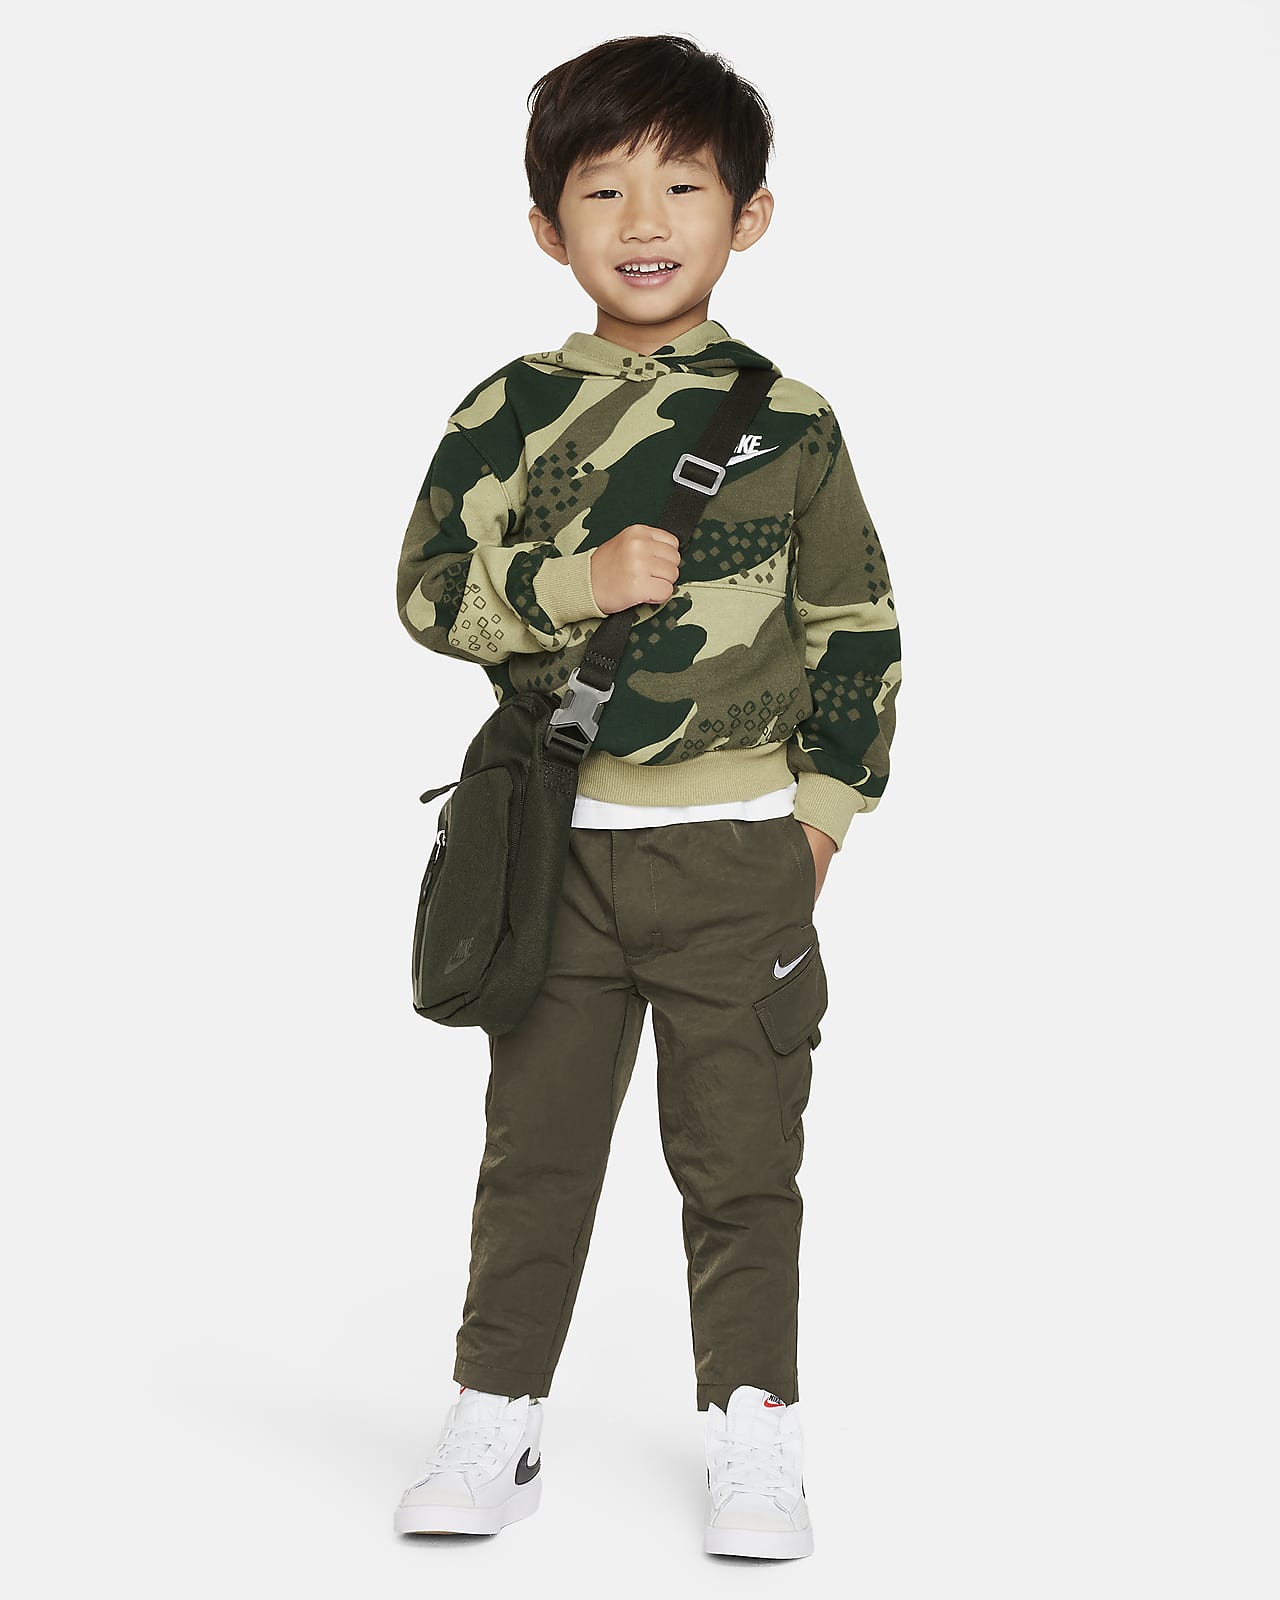 Kids Boy Cargo Pants Athletic Sports Casual Jogger Dungarees Trousers  Sweatpants | eBay